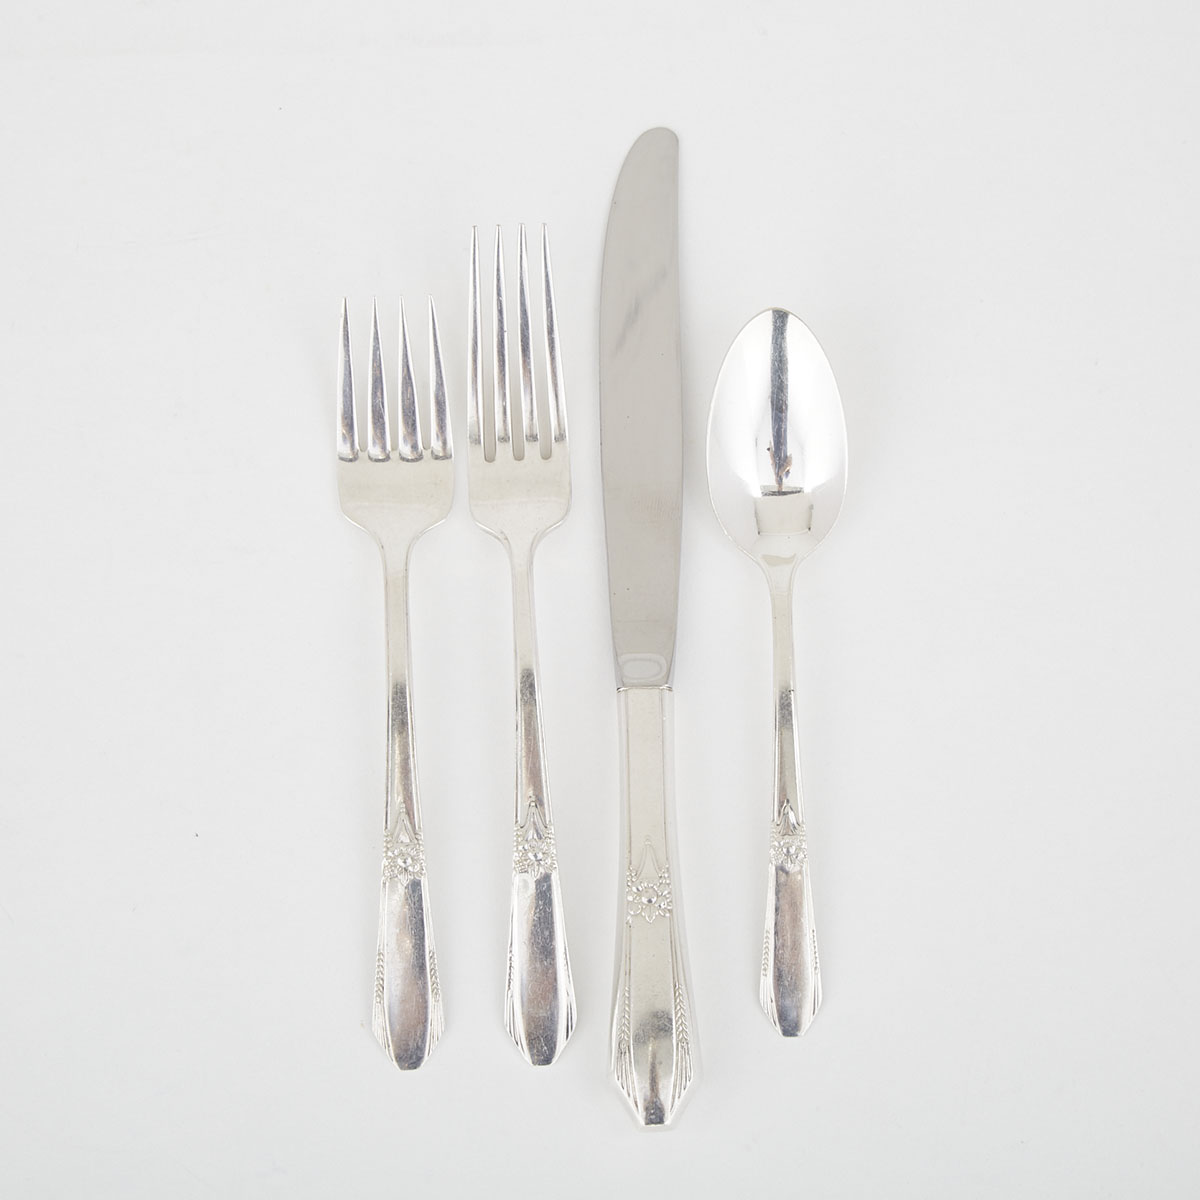 Canadian Silver ‘Laurier’ Pattern Flatware, Northumbria, 20th century